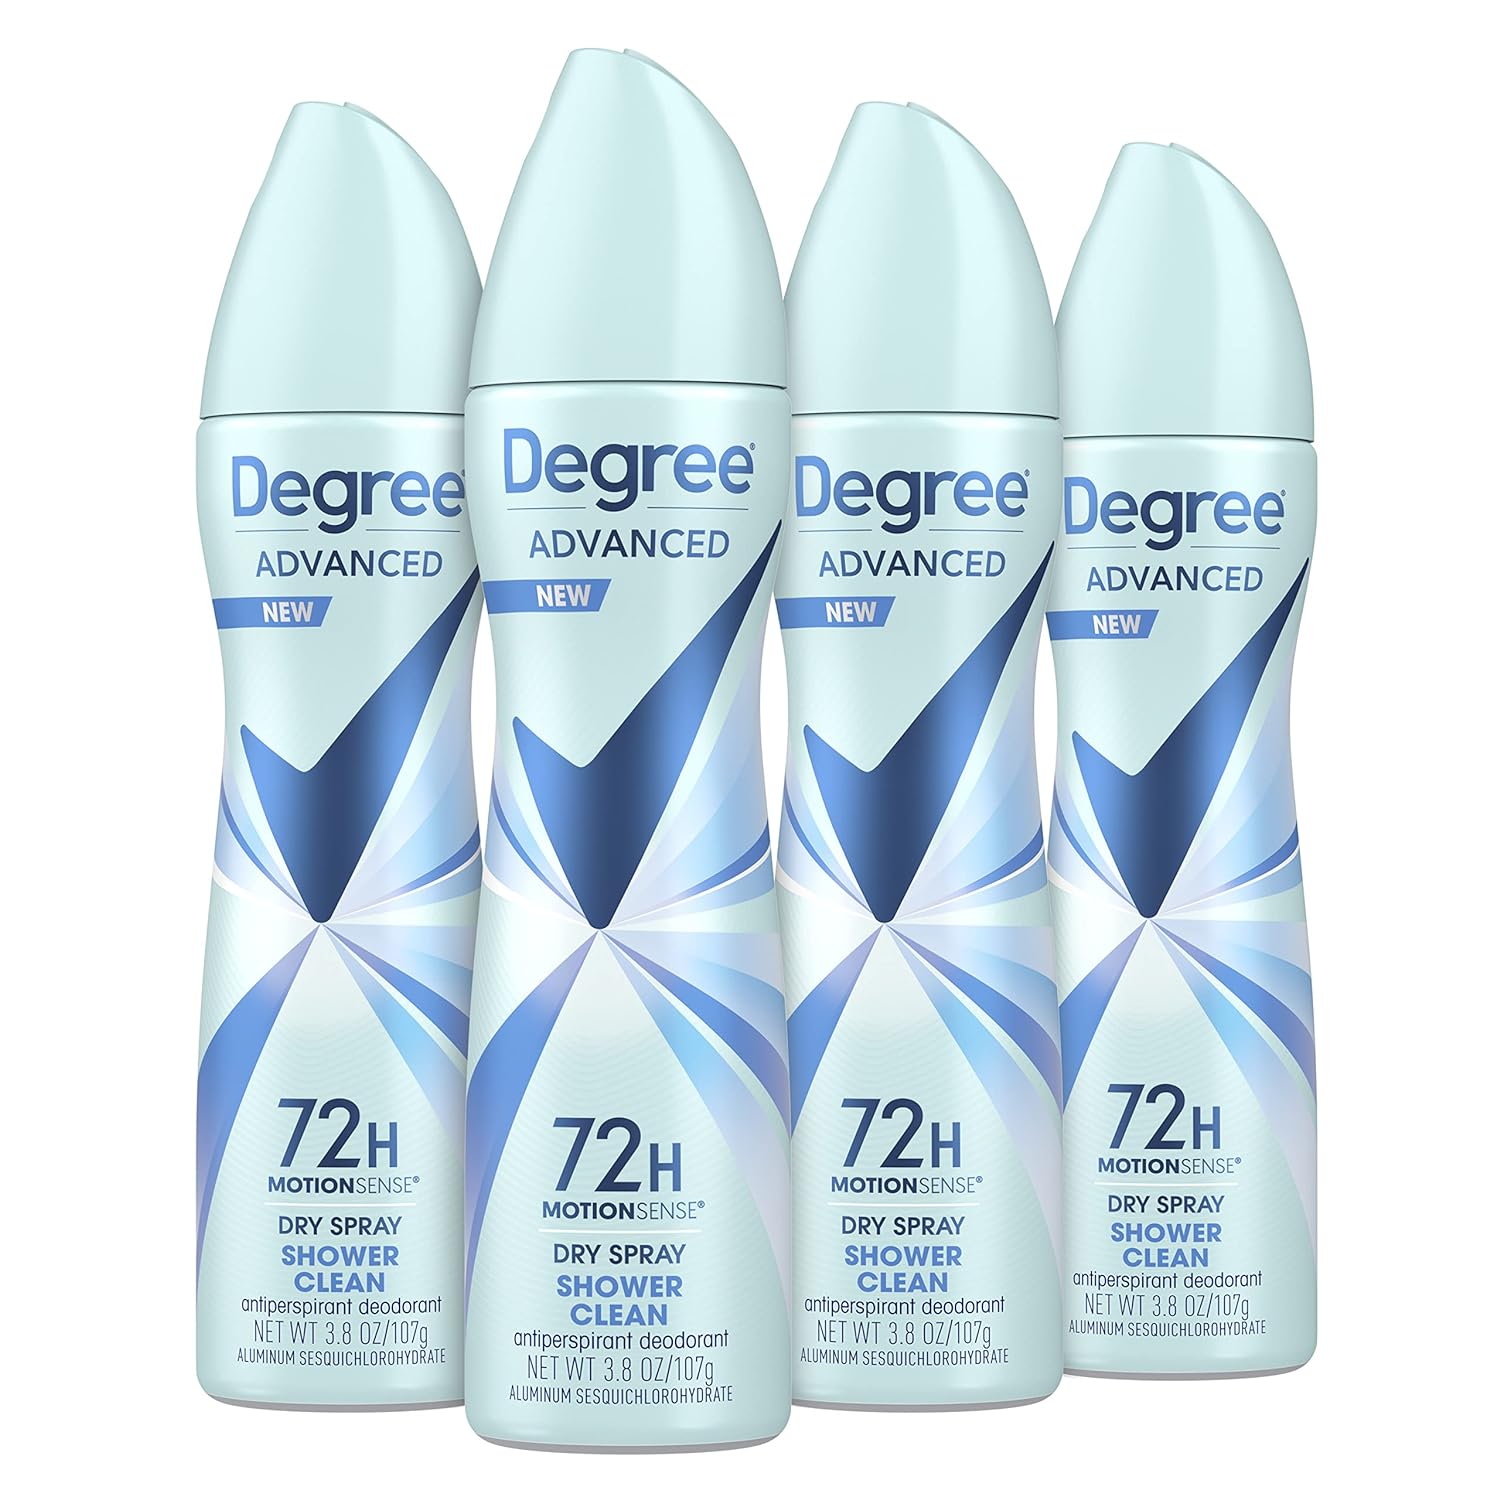 Degree Advanced Antiperspirant Deodorant Dry Spray 72-Hour Sweat and Odor Protection Shower Clean Deodorant Spray For Women With MotionSense Technology 3.8 oz, Pack of 4